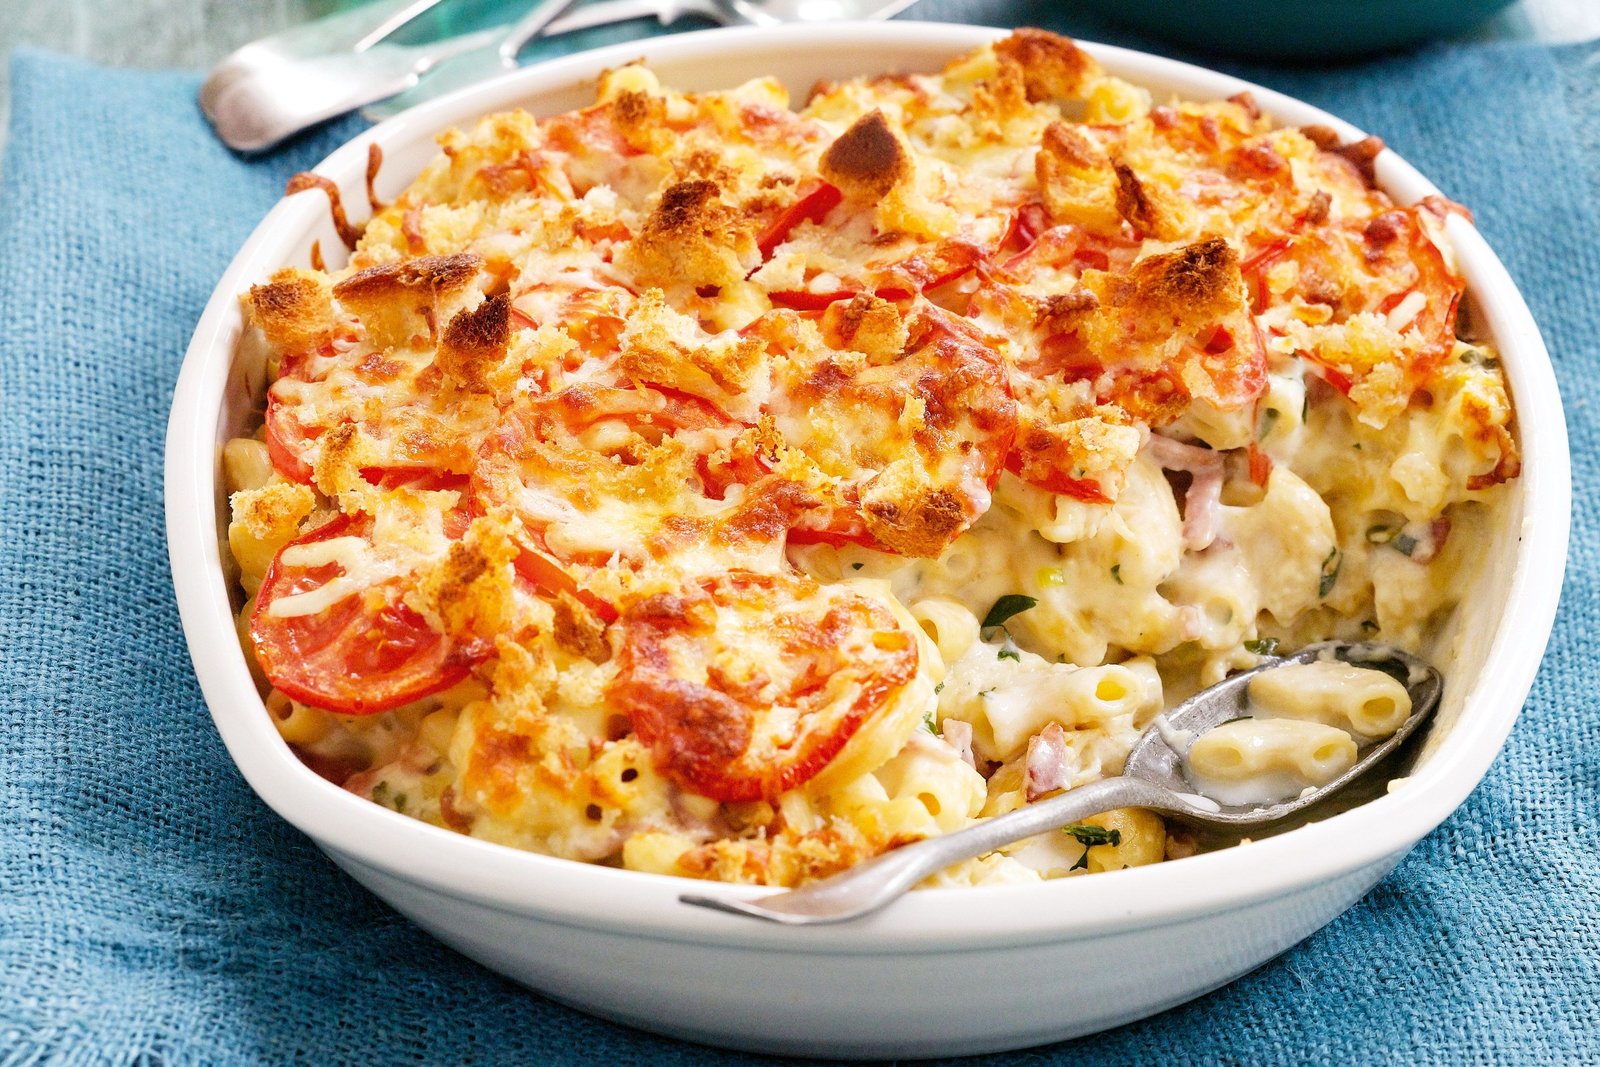 Canada consumes more cheese and macaroni than any other country in the world.